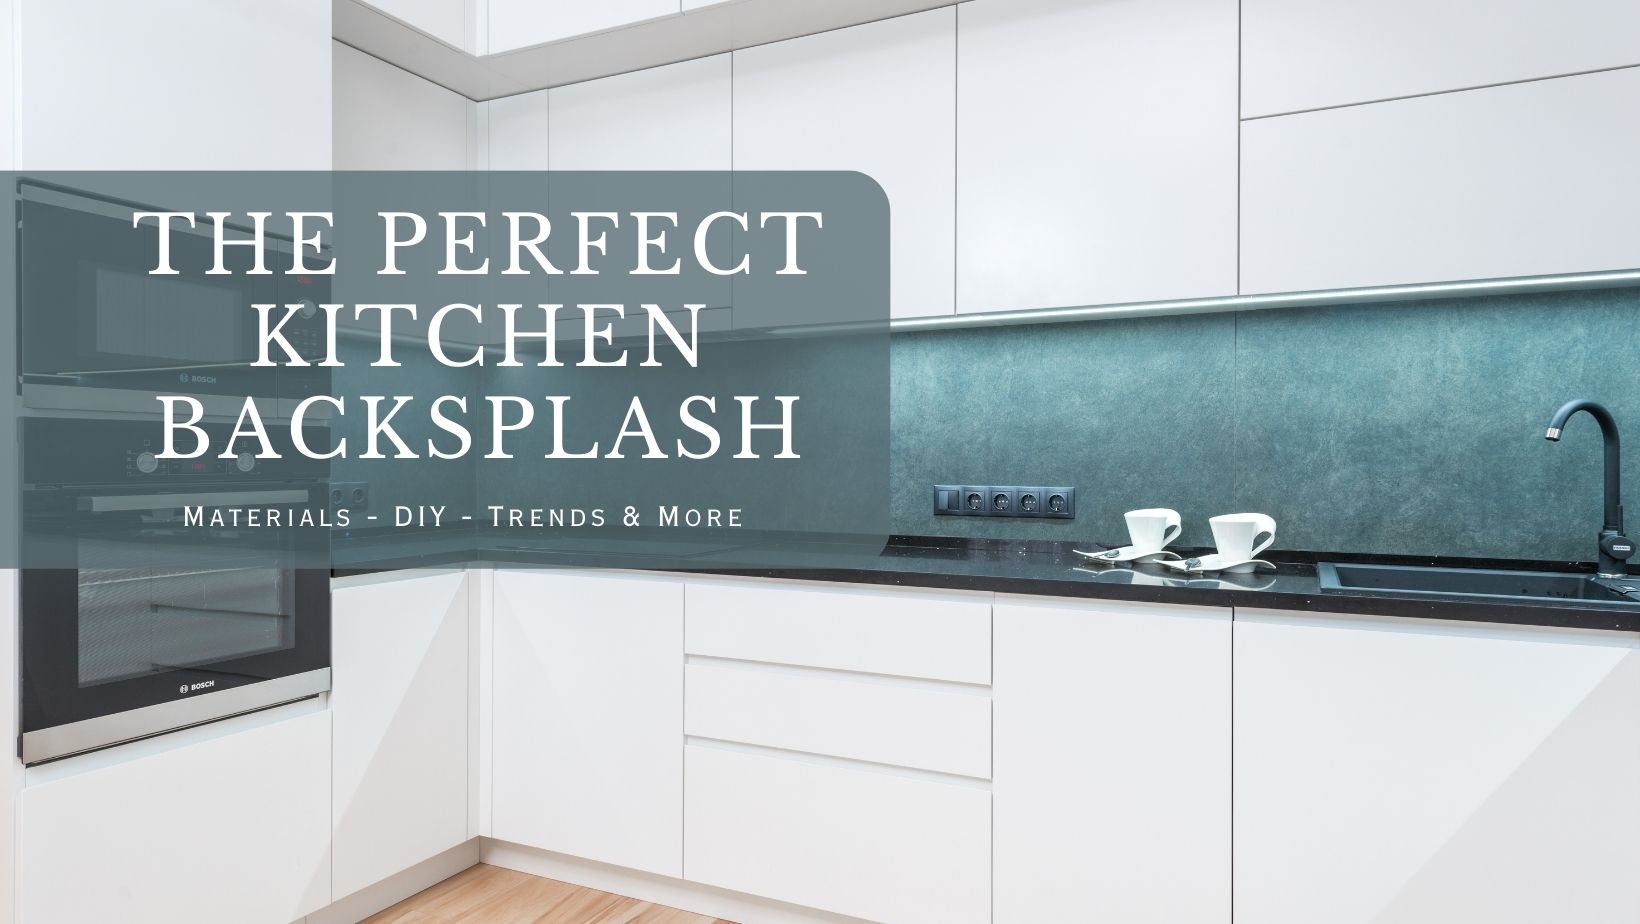 The Perfect Kitchen Backsplash – 8 Cool Materials, Trends, DIY & More